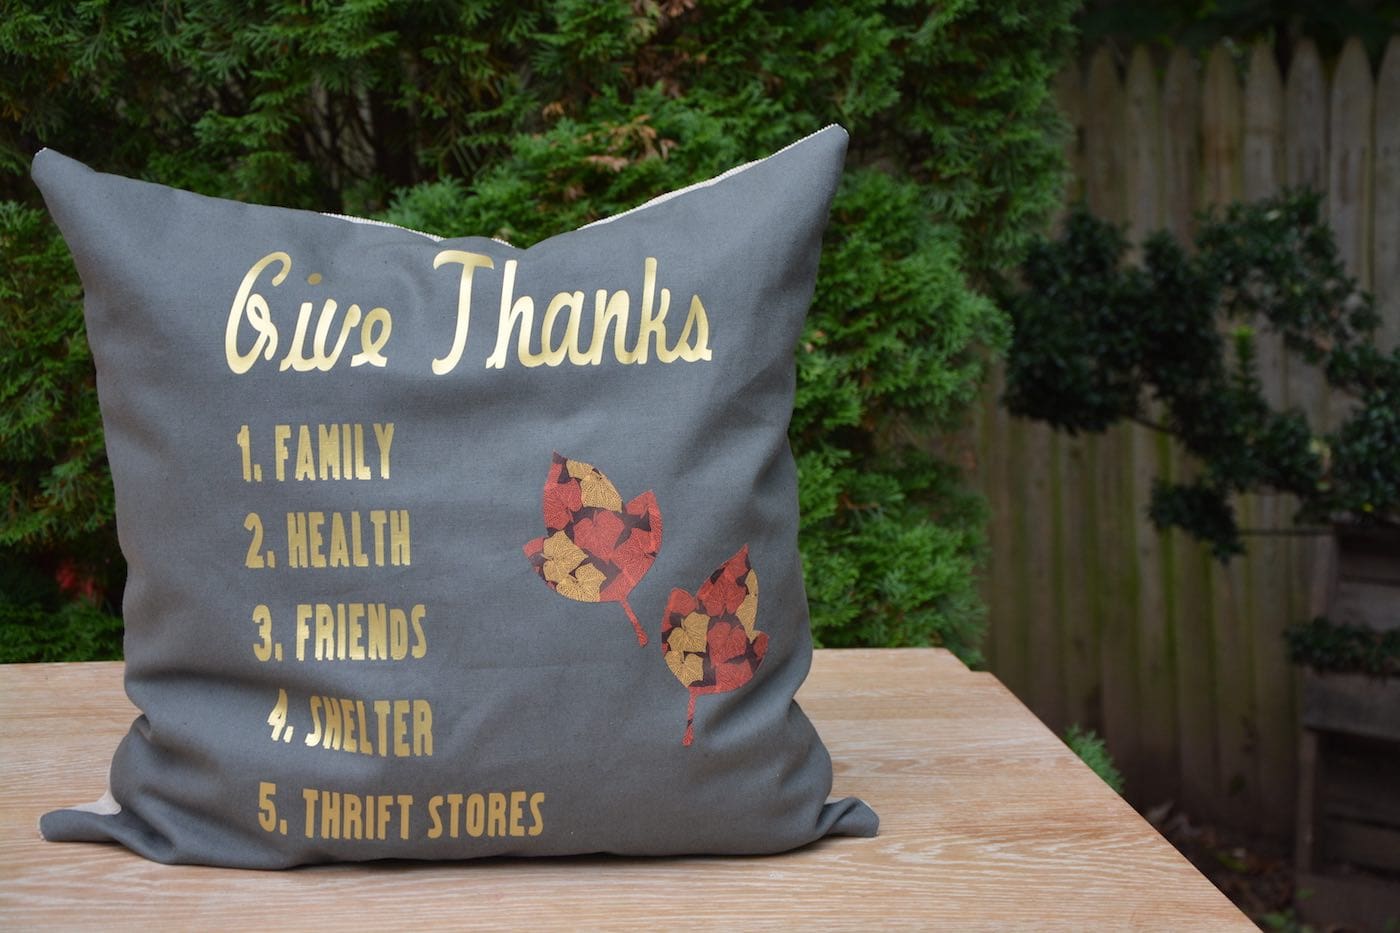 Tutorial: How to Sew an Iron-on DIY Pillow for Thanksgiving